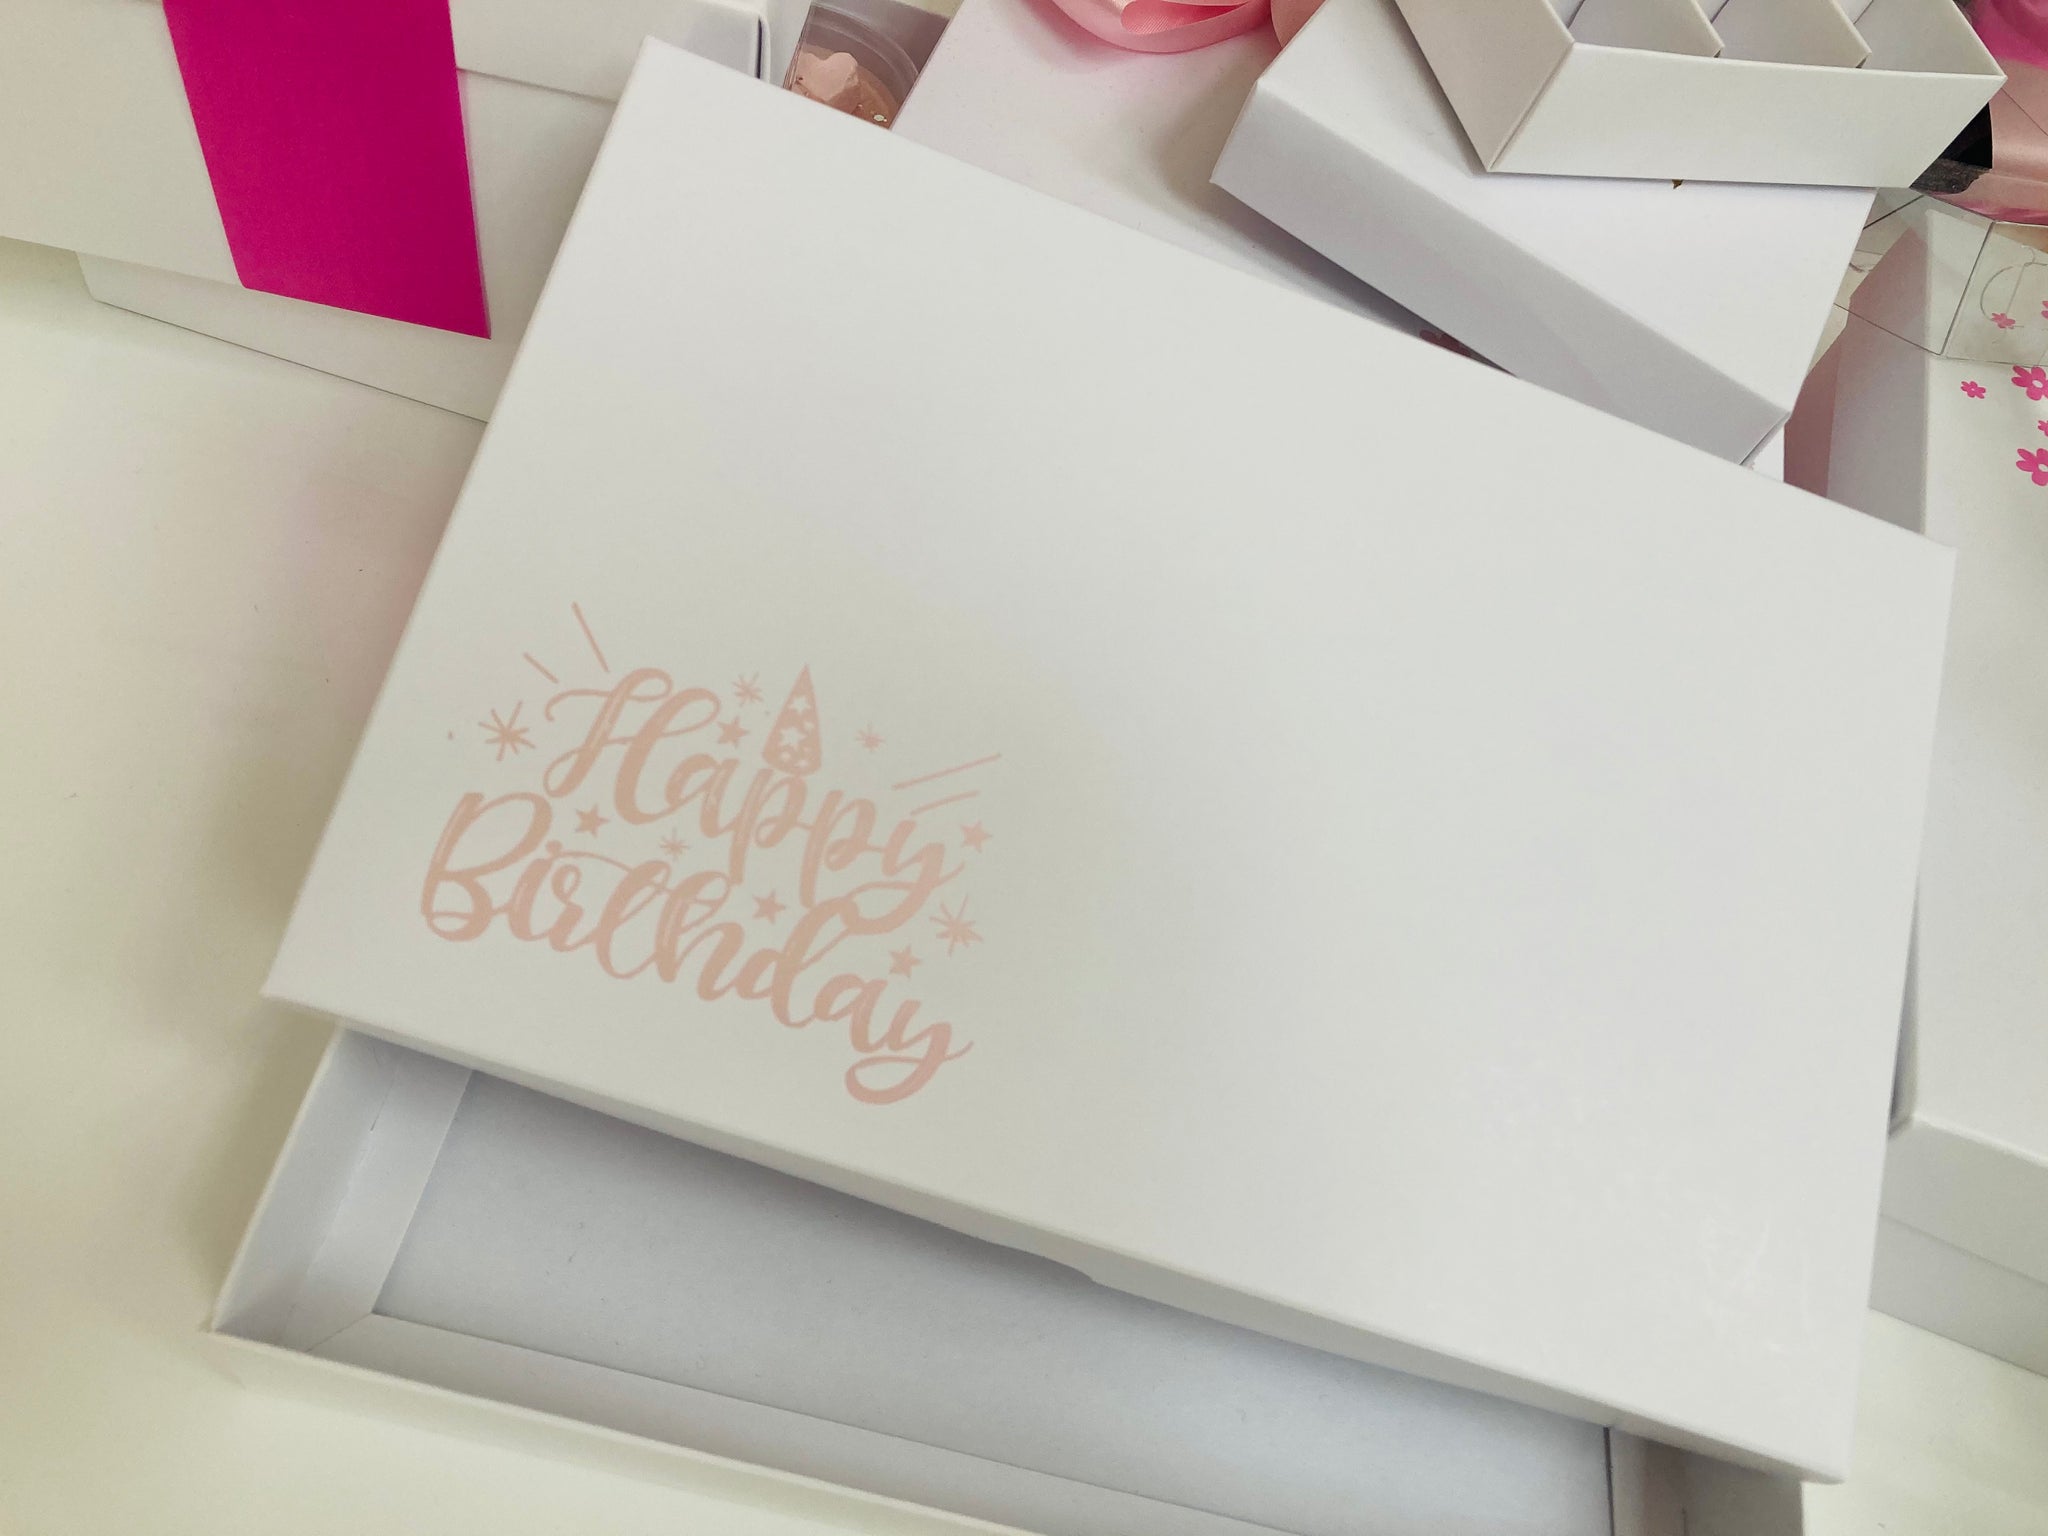 PALE PINK HAPPY BIRTHDAY SOLID WHITE LID GIFT BOX BLANK 240x155x30mm